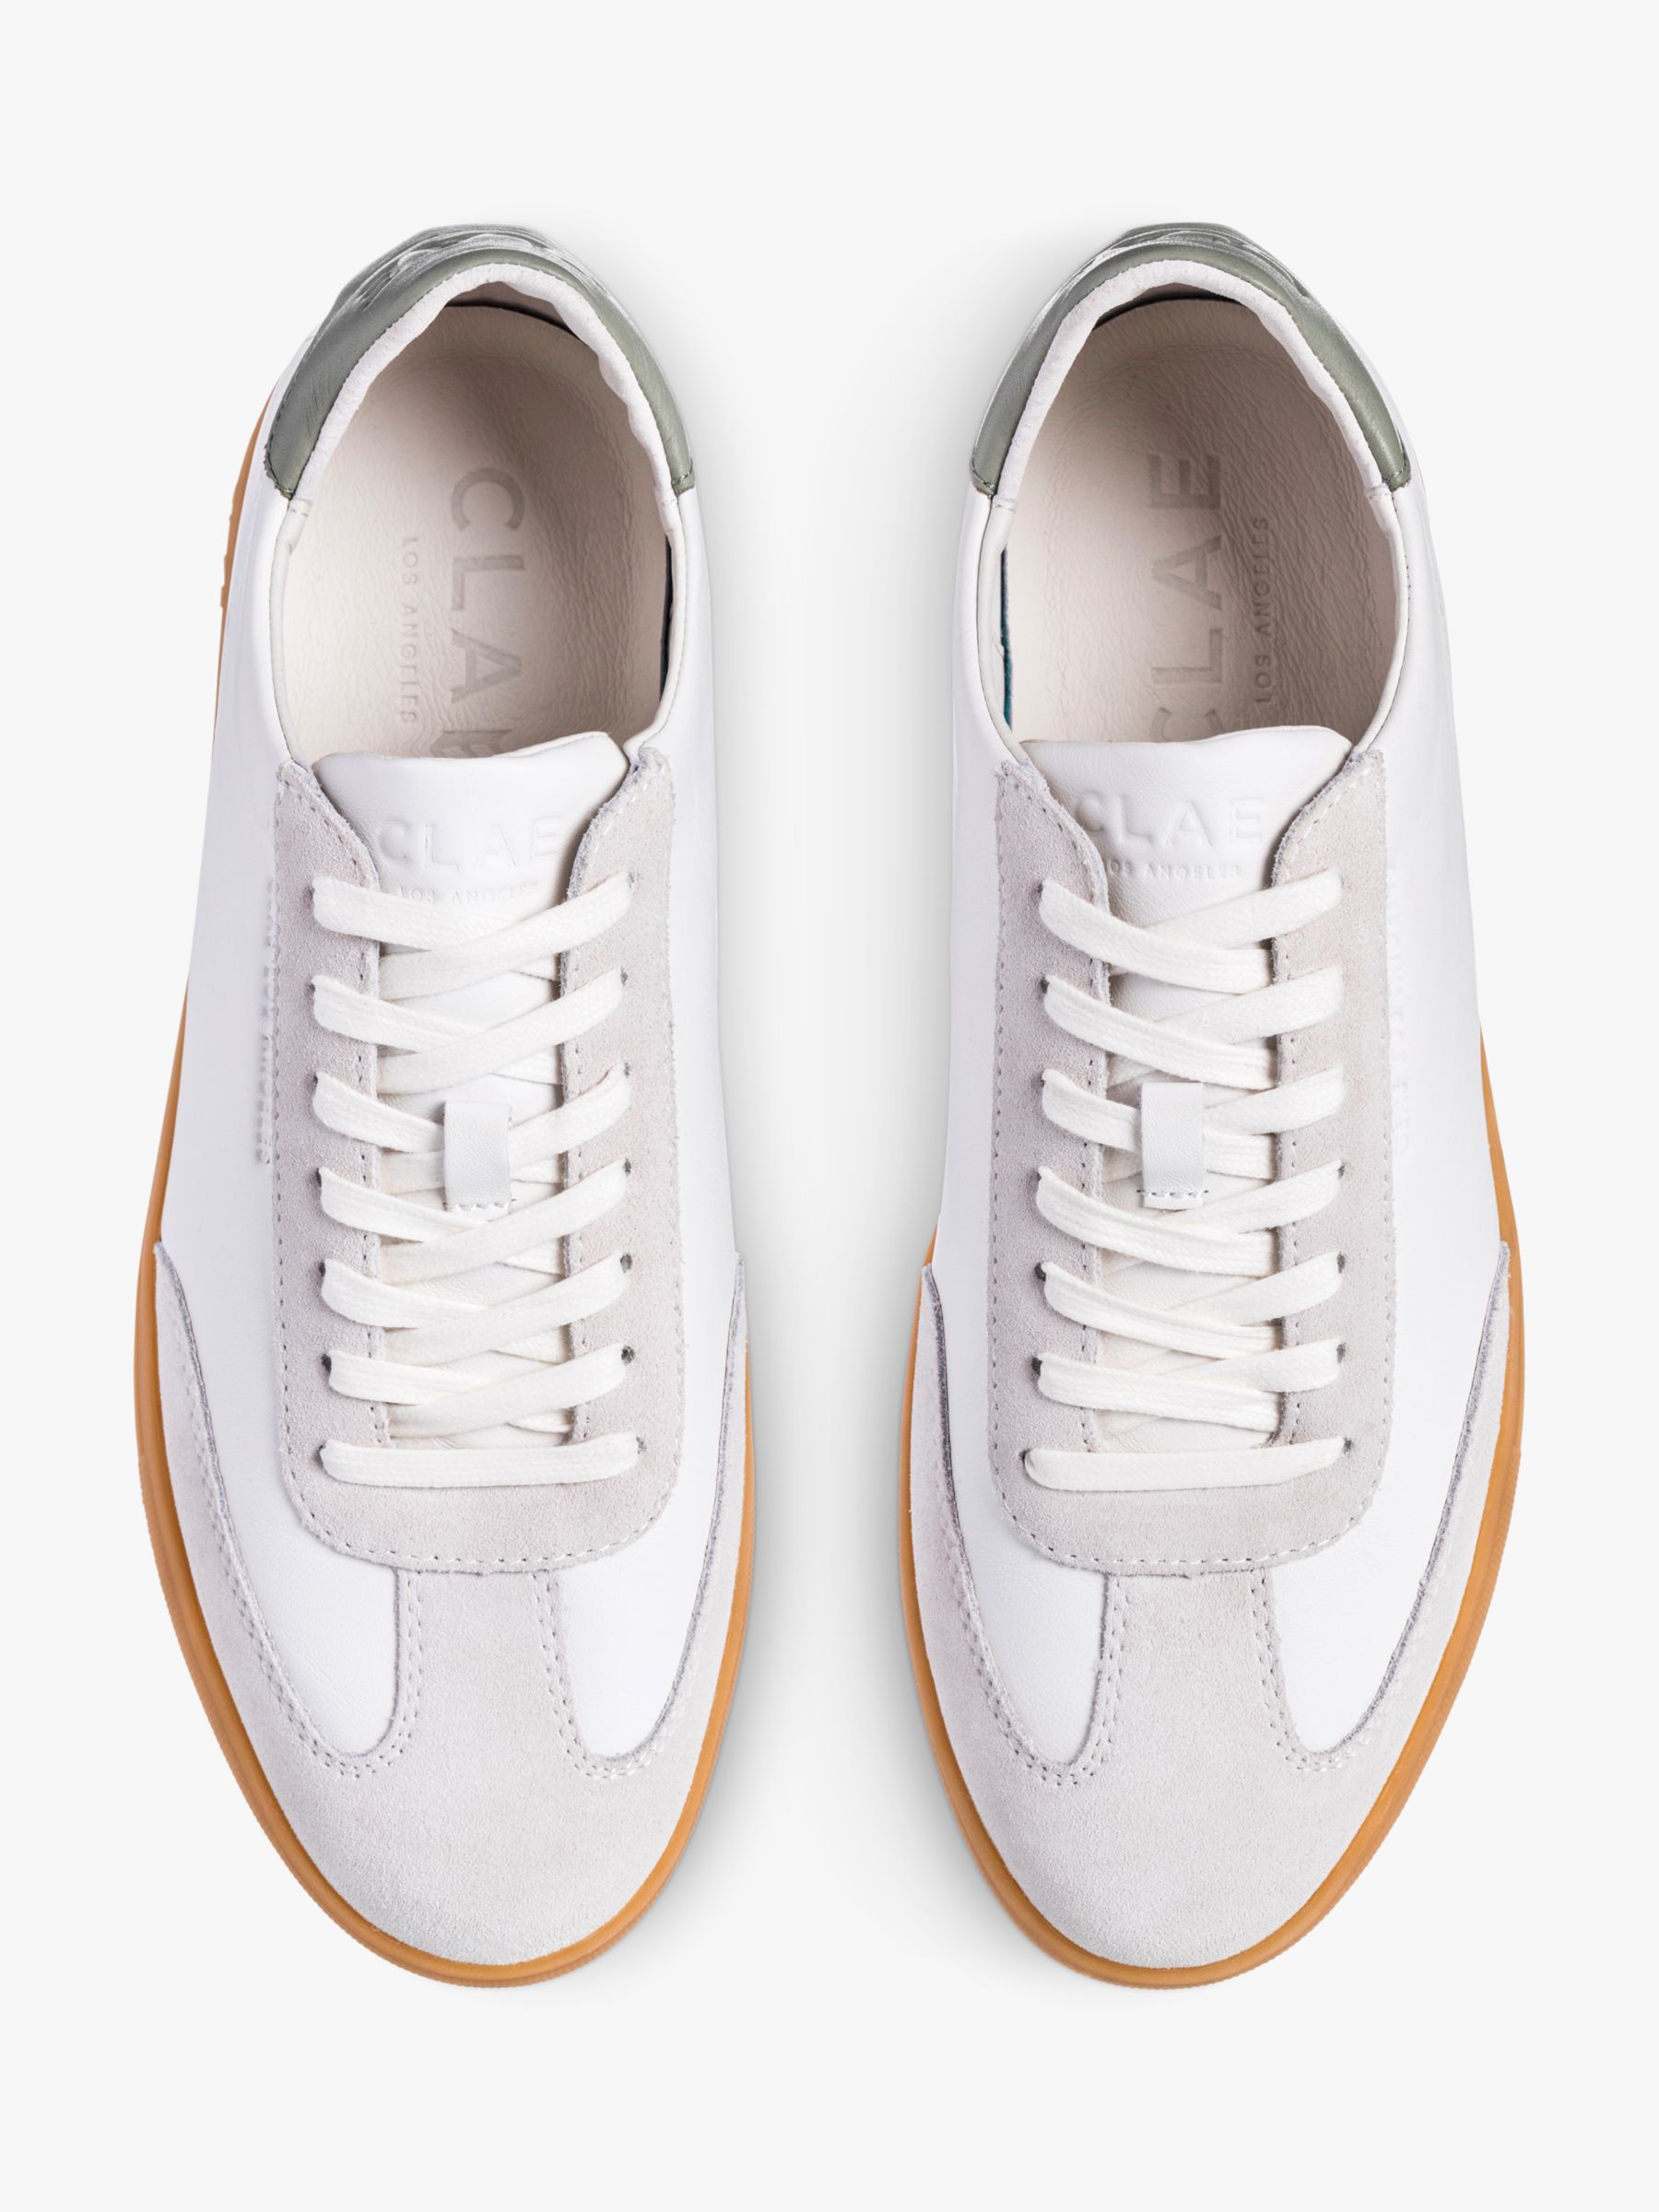 CLAE Deane Leather Low Top Trainers, White Tea Gum, 9